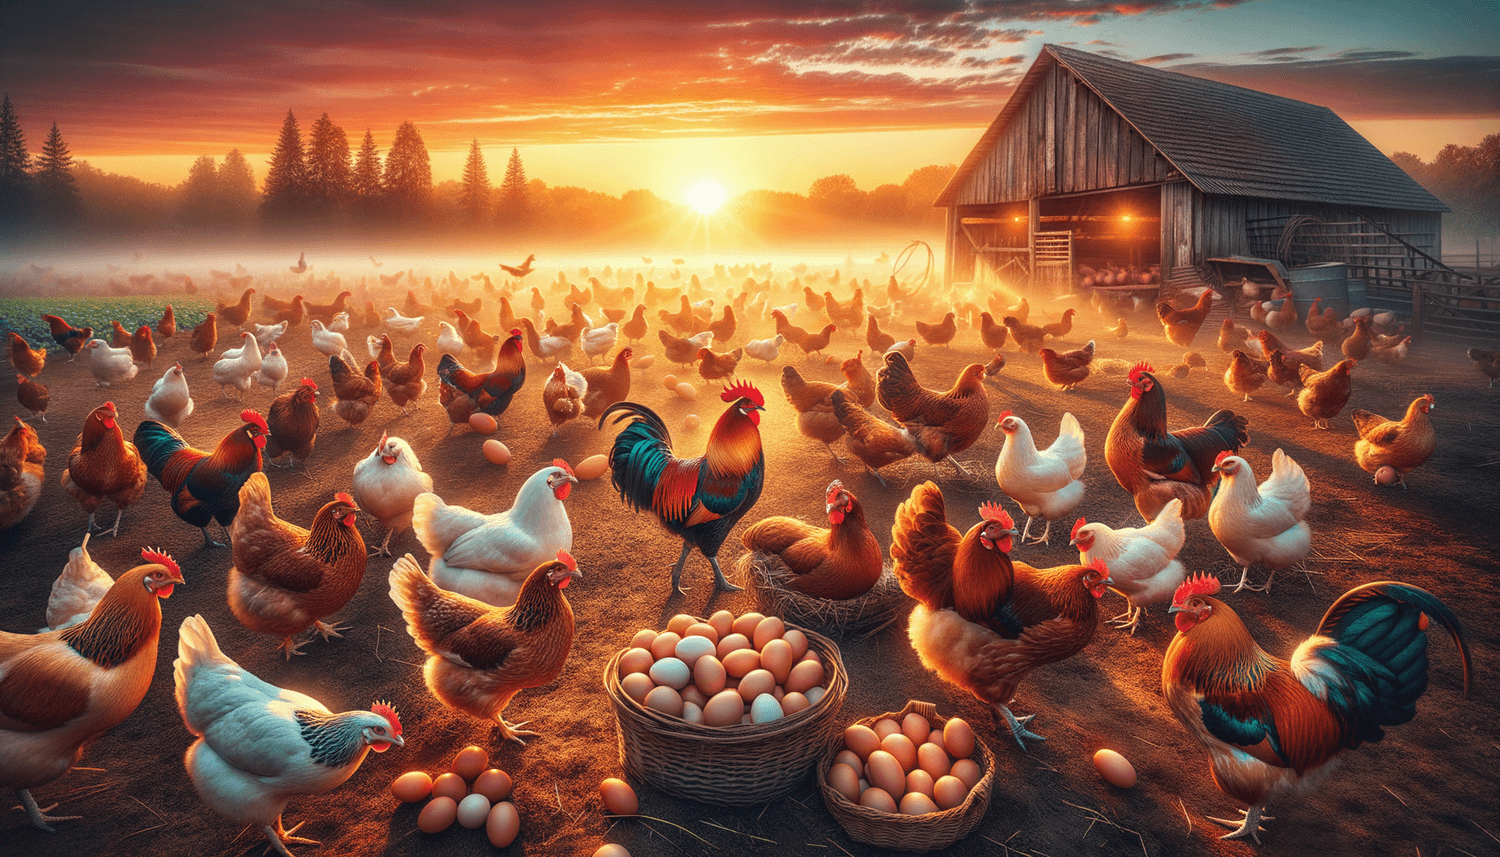 What Chickens Lay the Most Eggs?